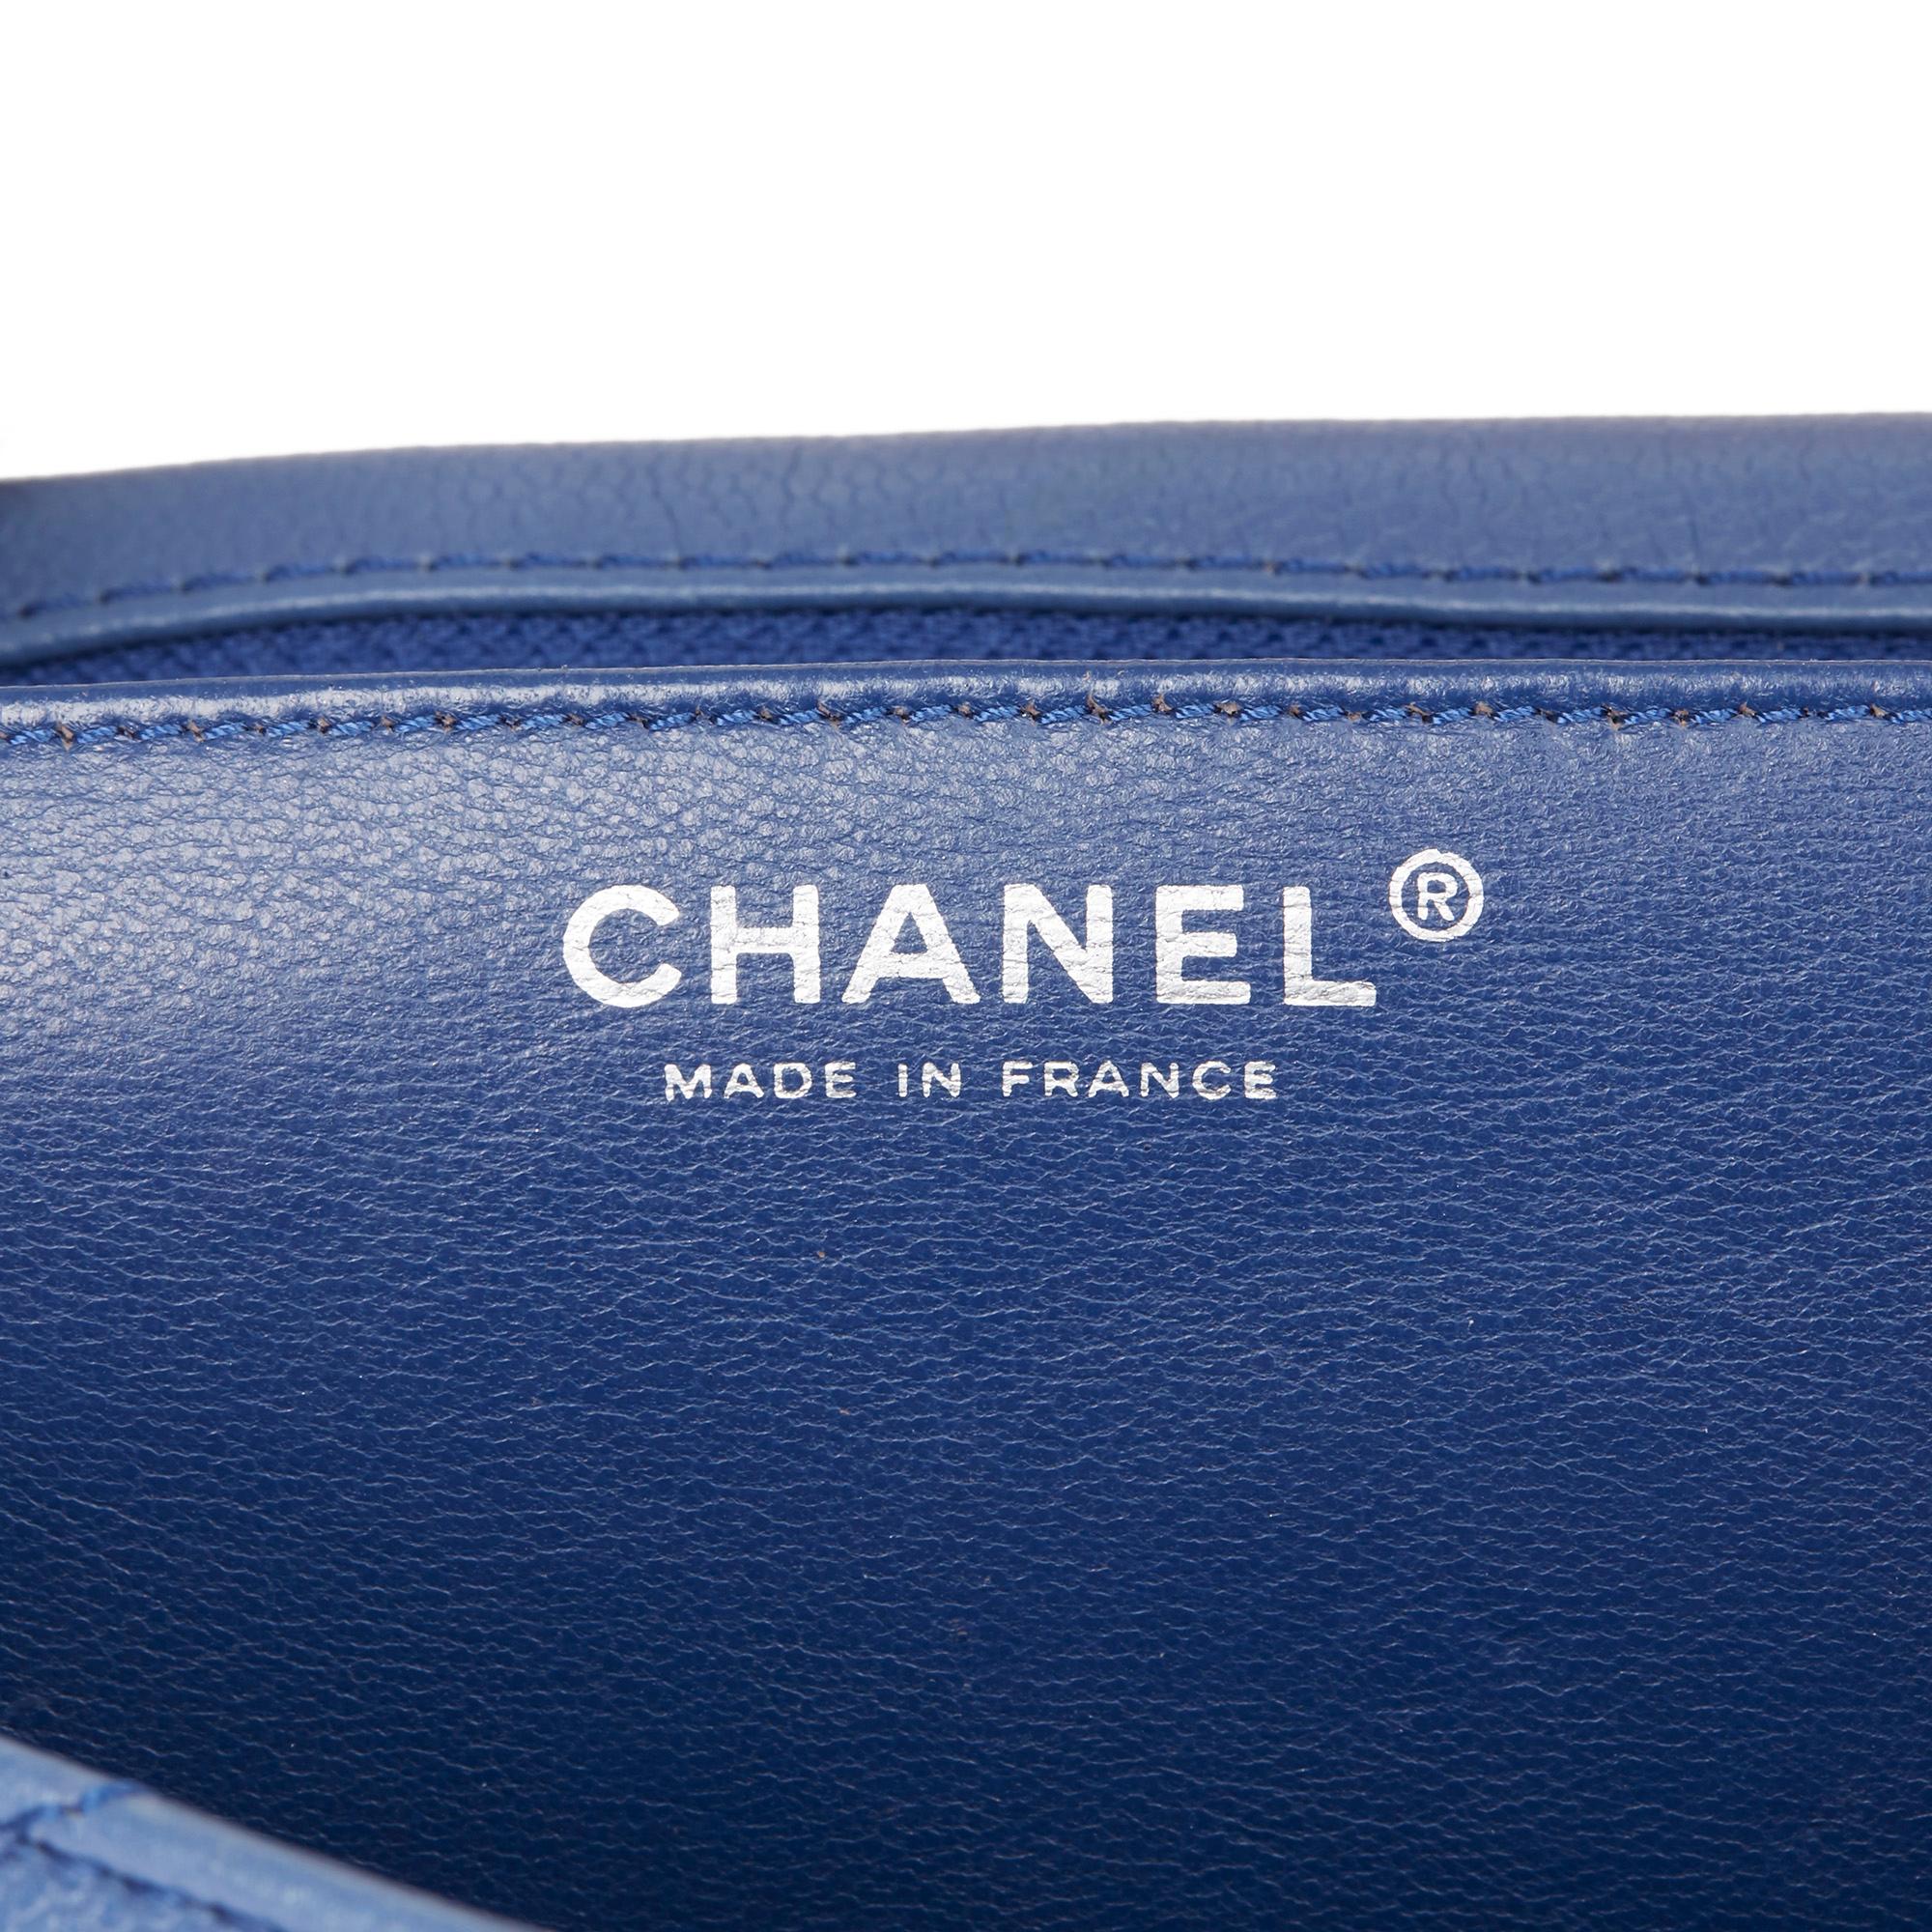 CHANEL
Blue Quilted Caviar Leather Jumbo Classic Single Flap Bag

Xupes Reference: HB3434
Serial Number: 12861976
Age (Circa): 2008
Accompanied By: Authenticity Card
Authenticity Details: Authenticity Card, Serial Sticker (Made in France)
Gender: